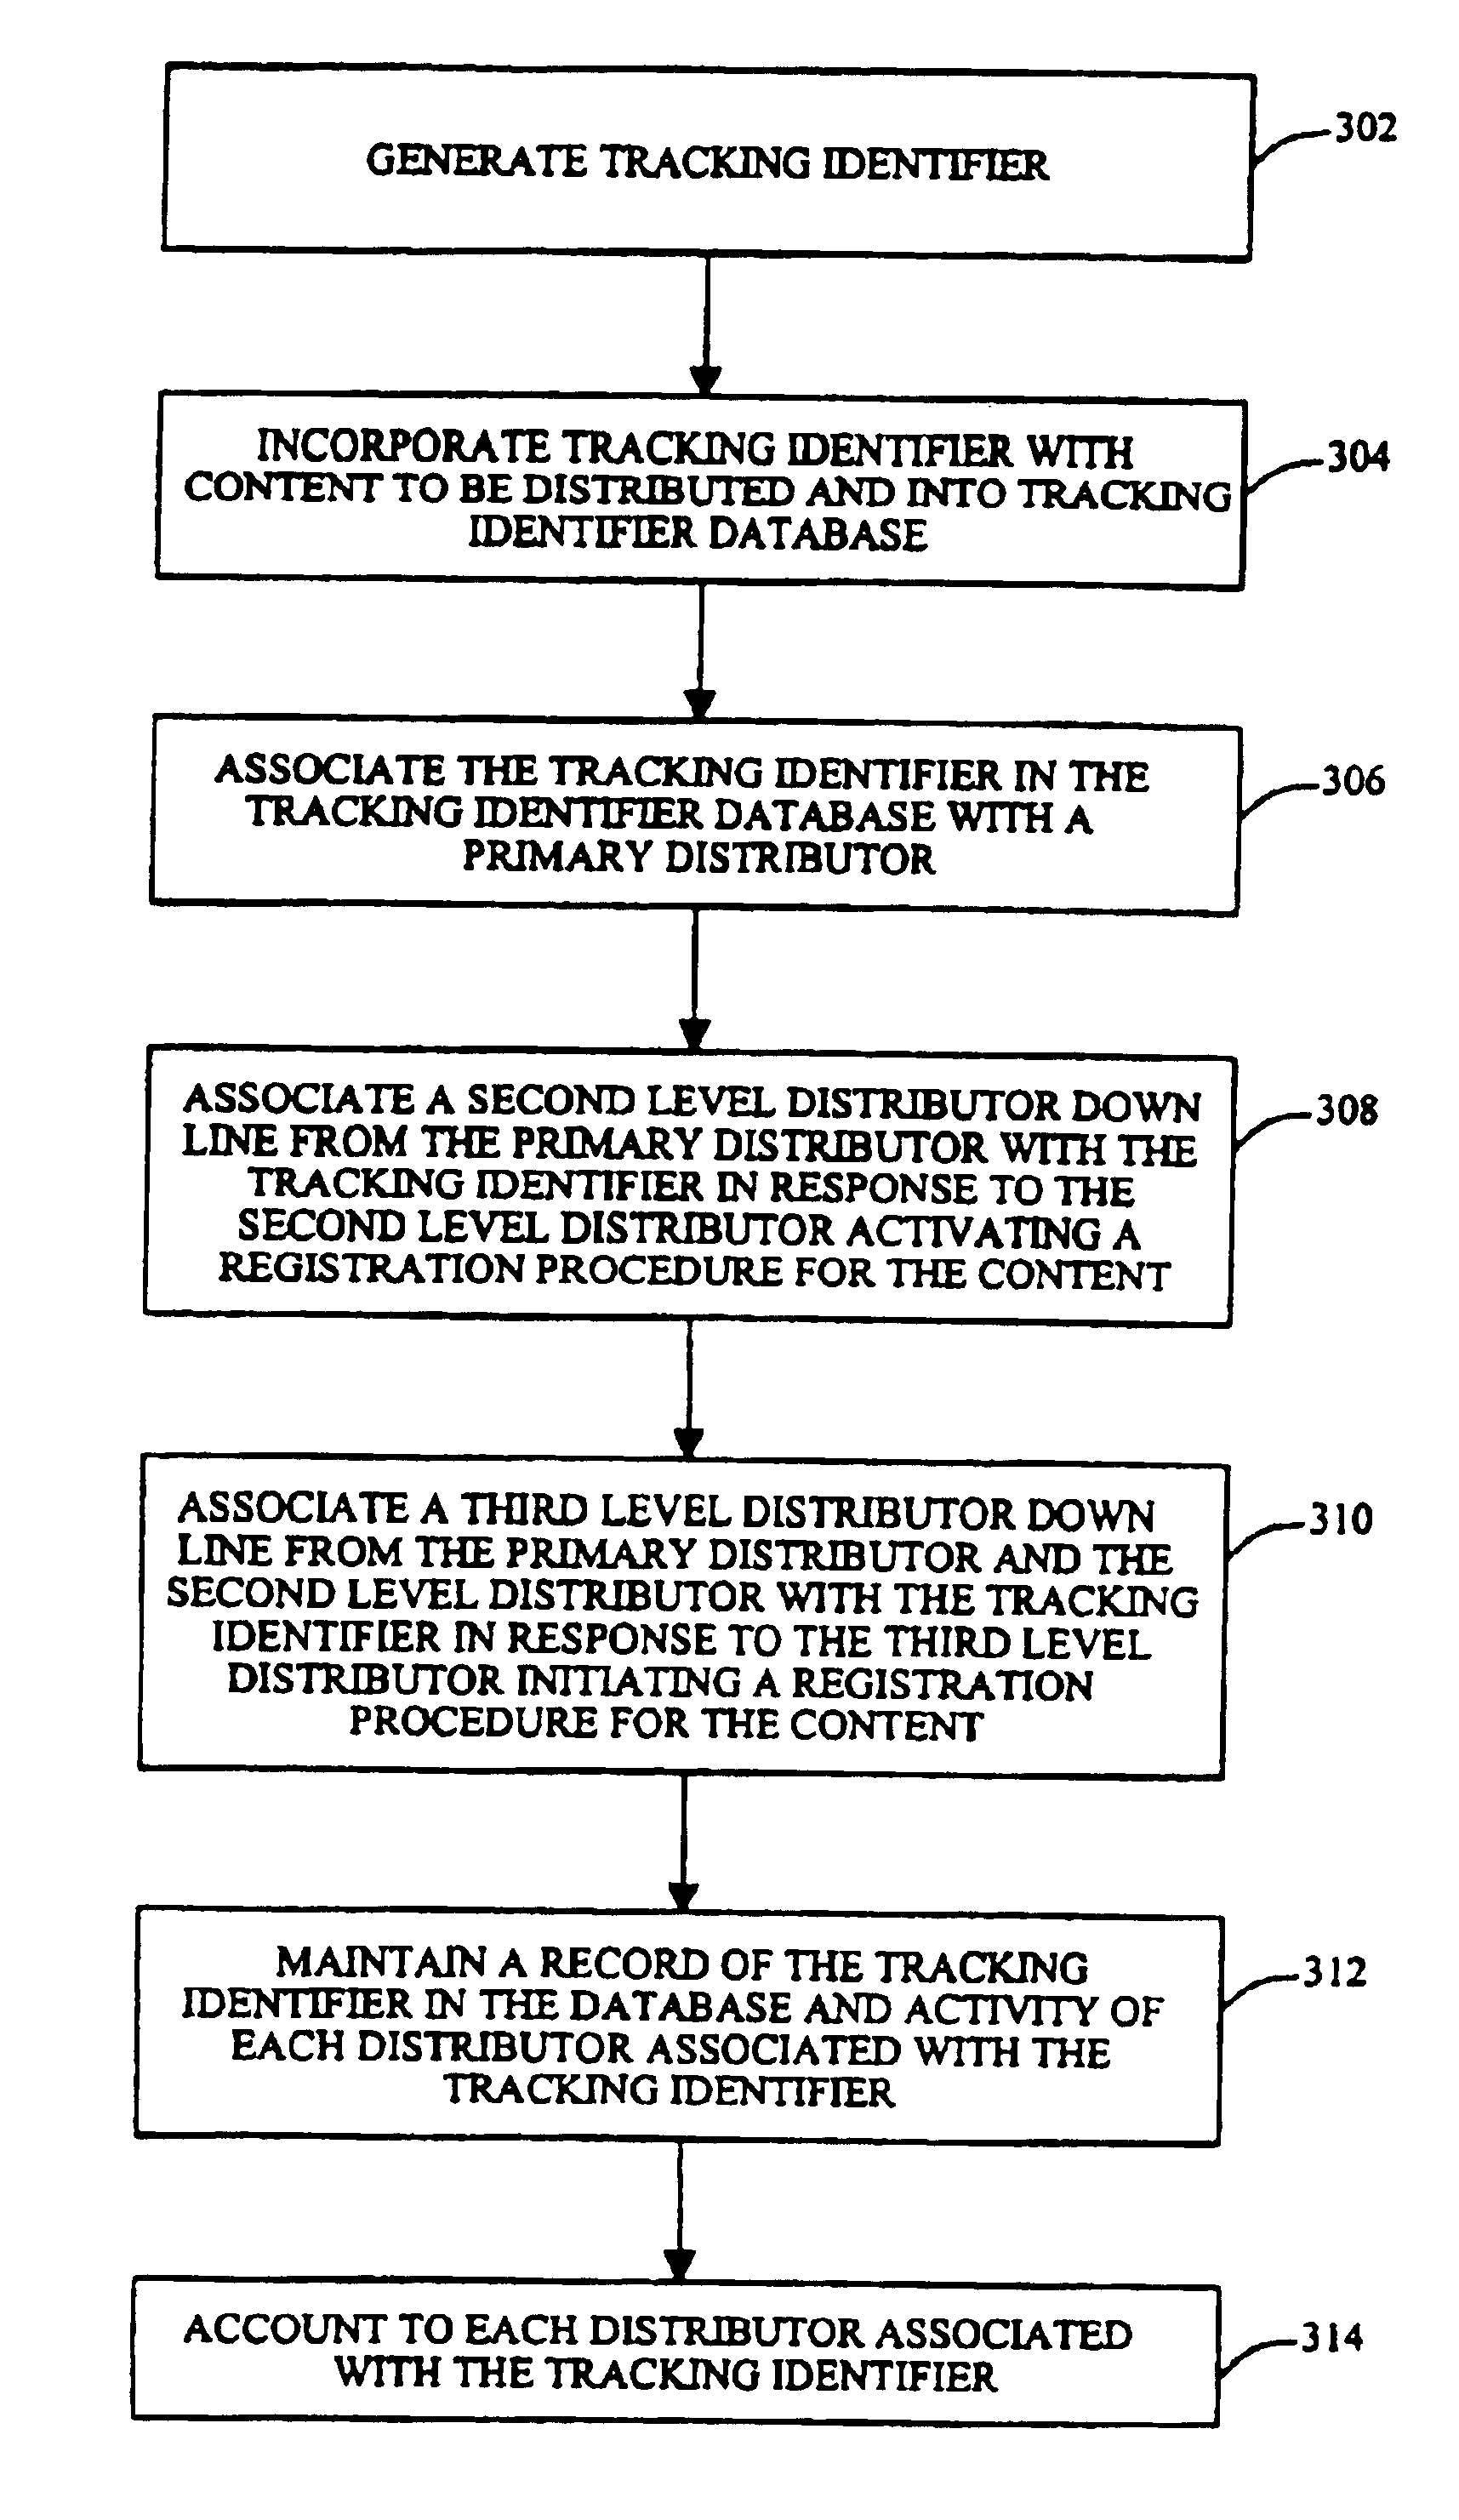 System, method and article of manufacture for tracking and supporting the distribution of content electronically